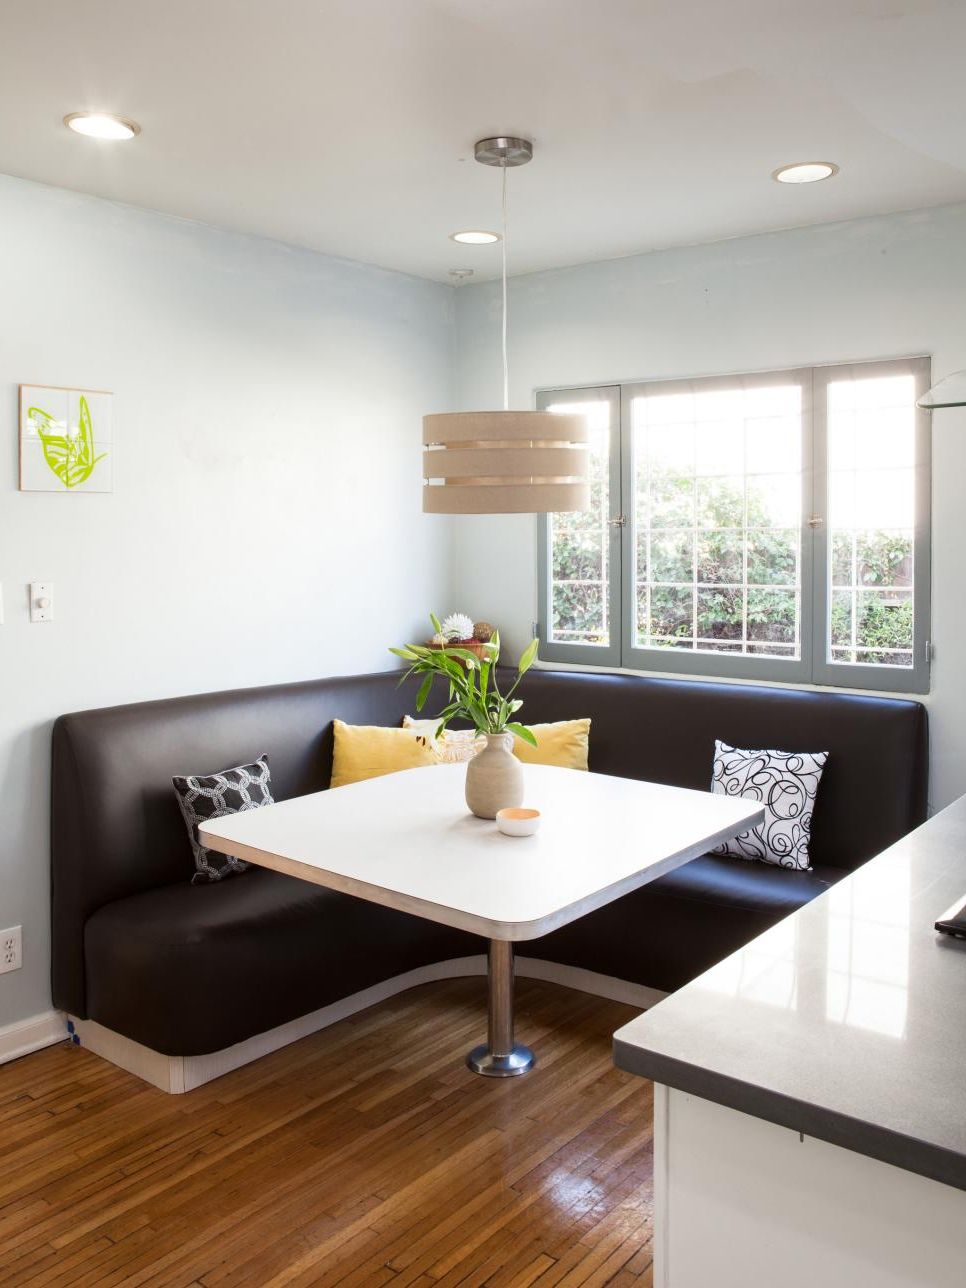 2019 White Corner Nooks With Regard To Retro Breakfast Nook With Black Banquette (View 13 of 15)